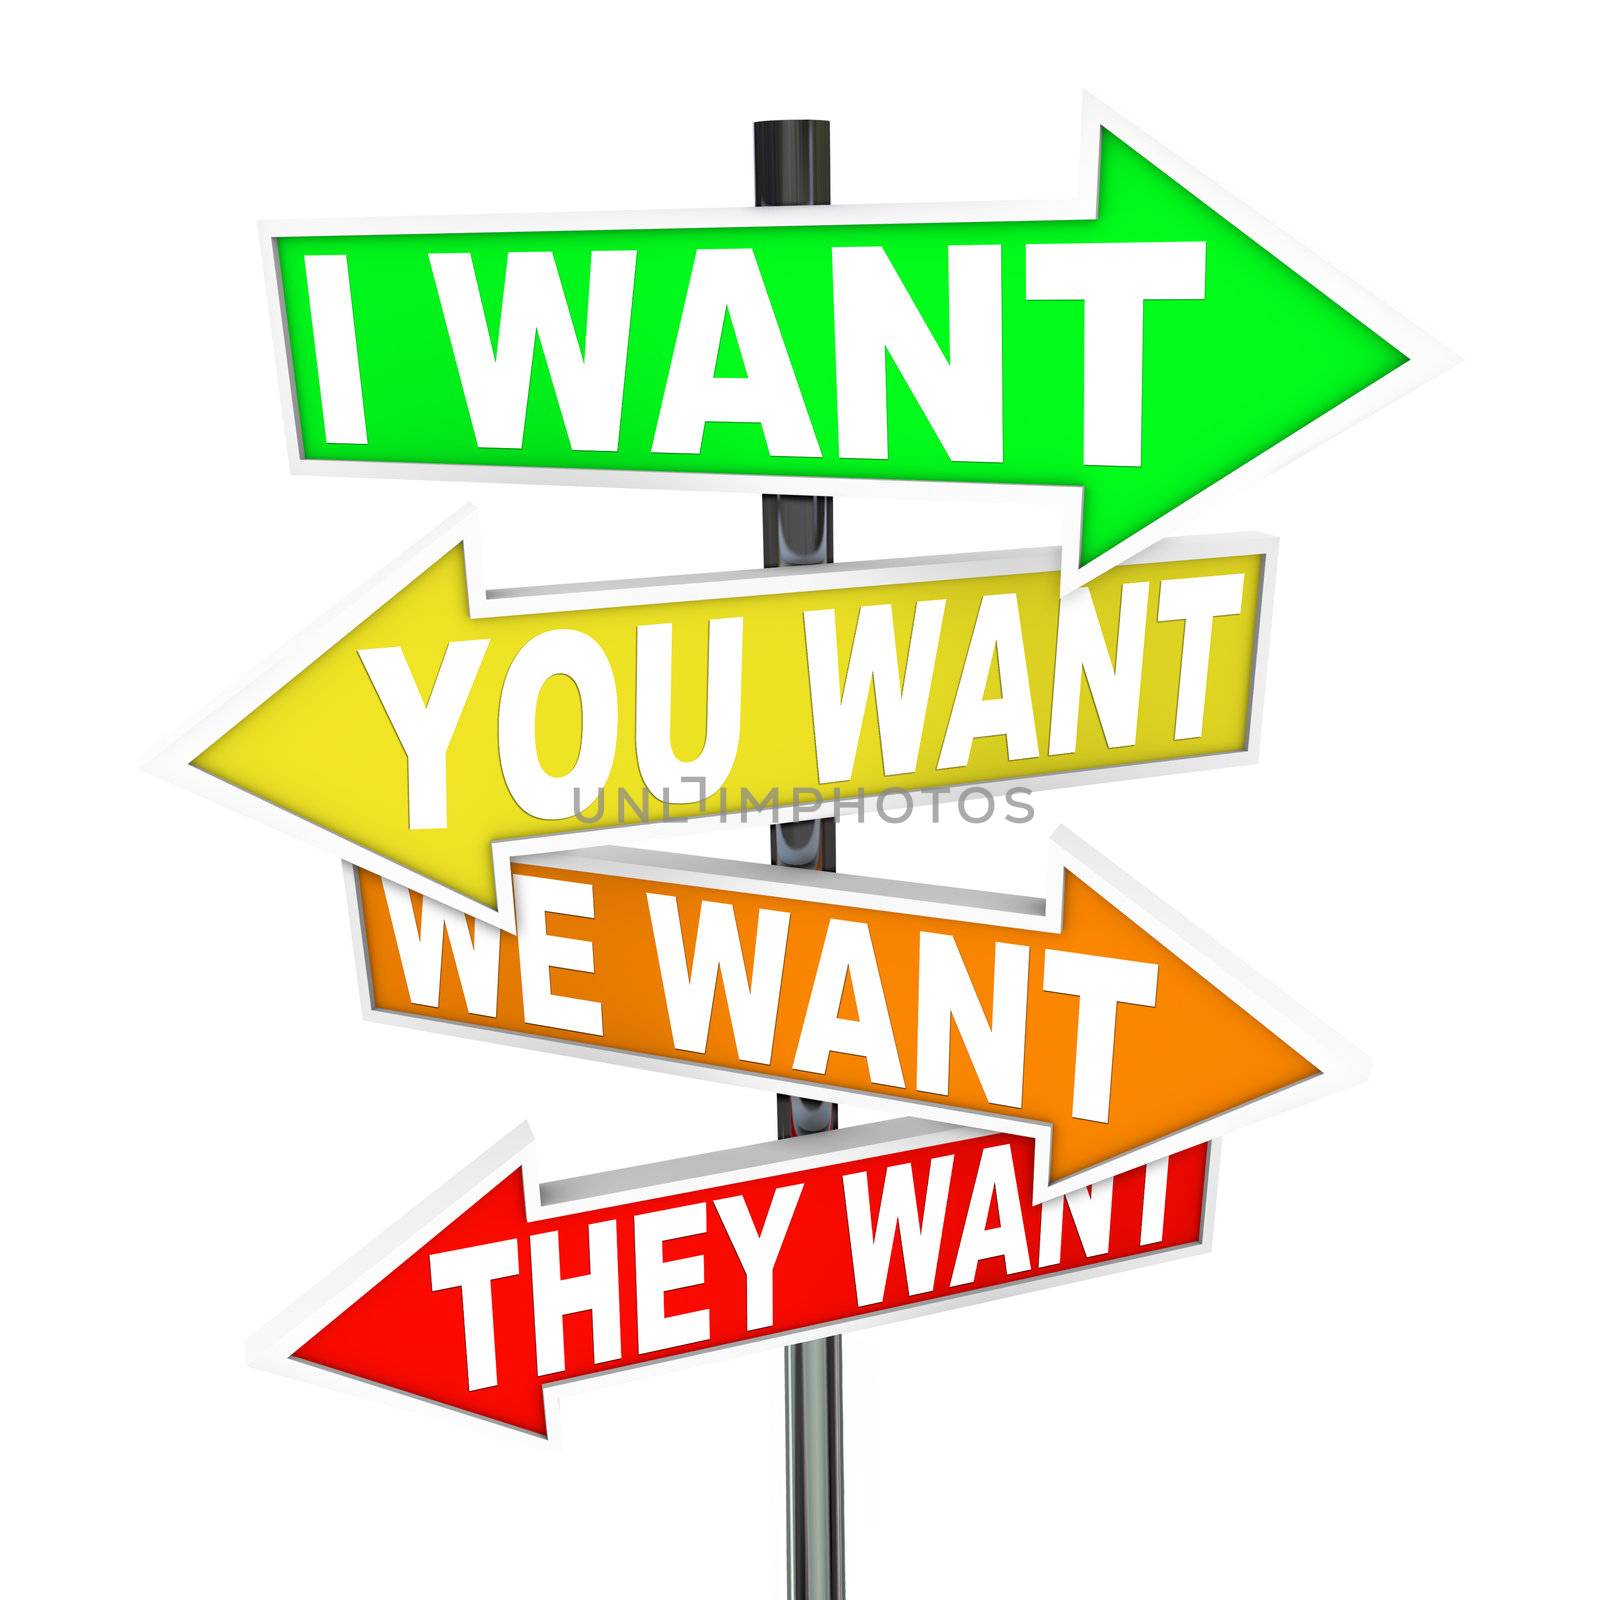 My Wants and Needs Vs Yours - Selfish Desires on Signs by iQoncept